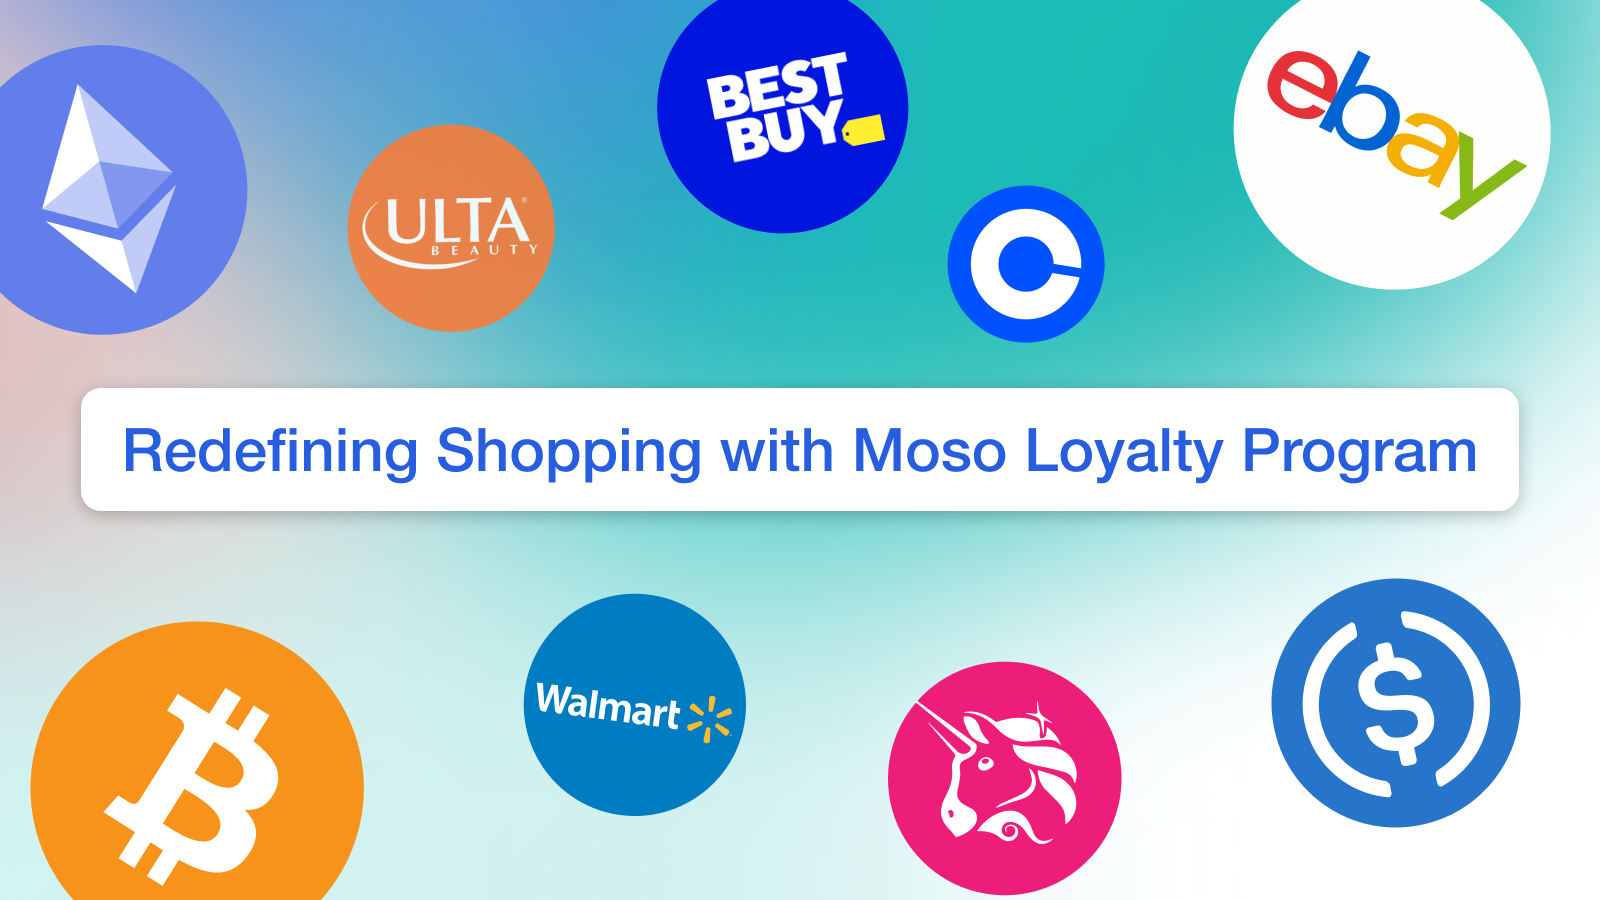 Moso’s Brand-New Loyalty Program Powered By Galxe